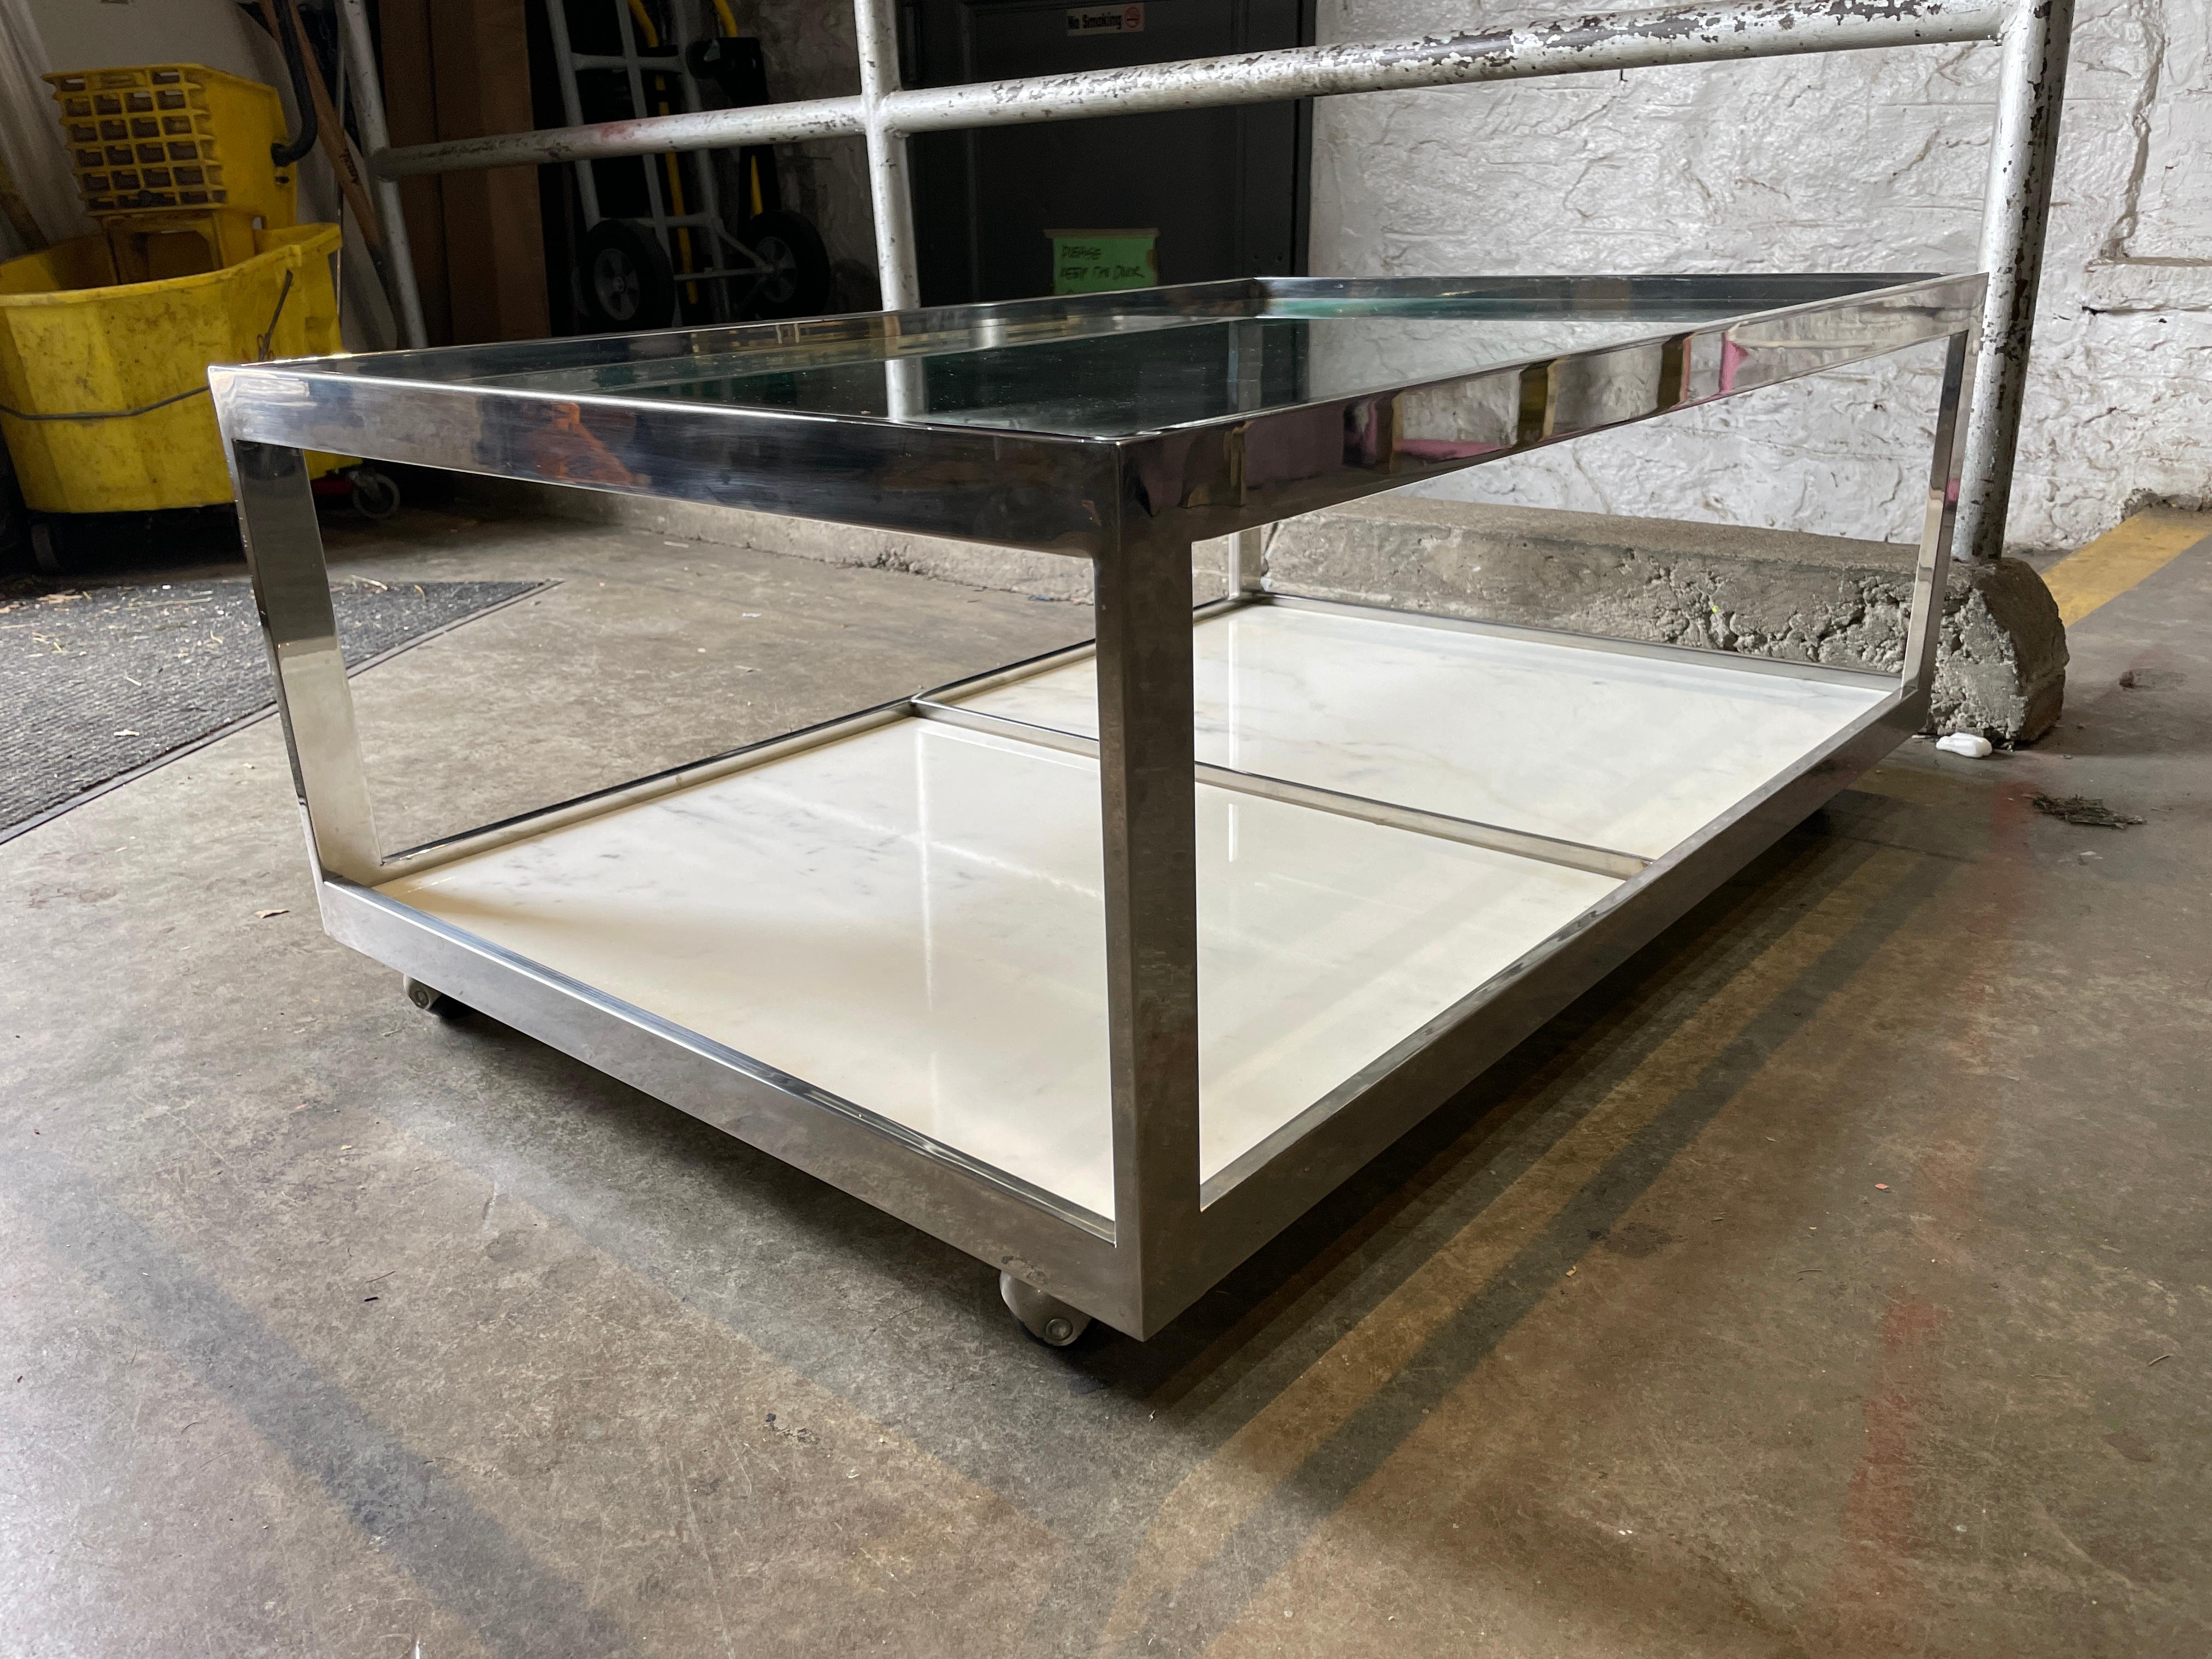 Mid-Century Modern 1970s Glass & marble coffee table with a chrome flat bar frame on casters. Located in Brooklyn NYC

Measures
38” x 25” x 16” high including casters
 